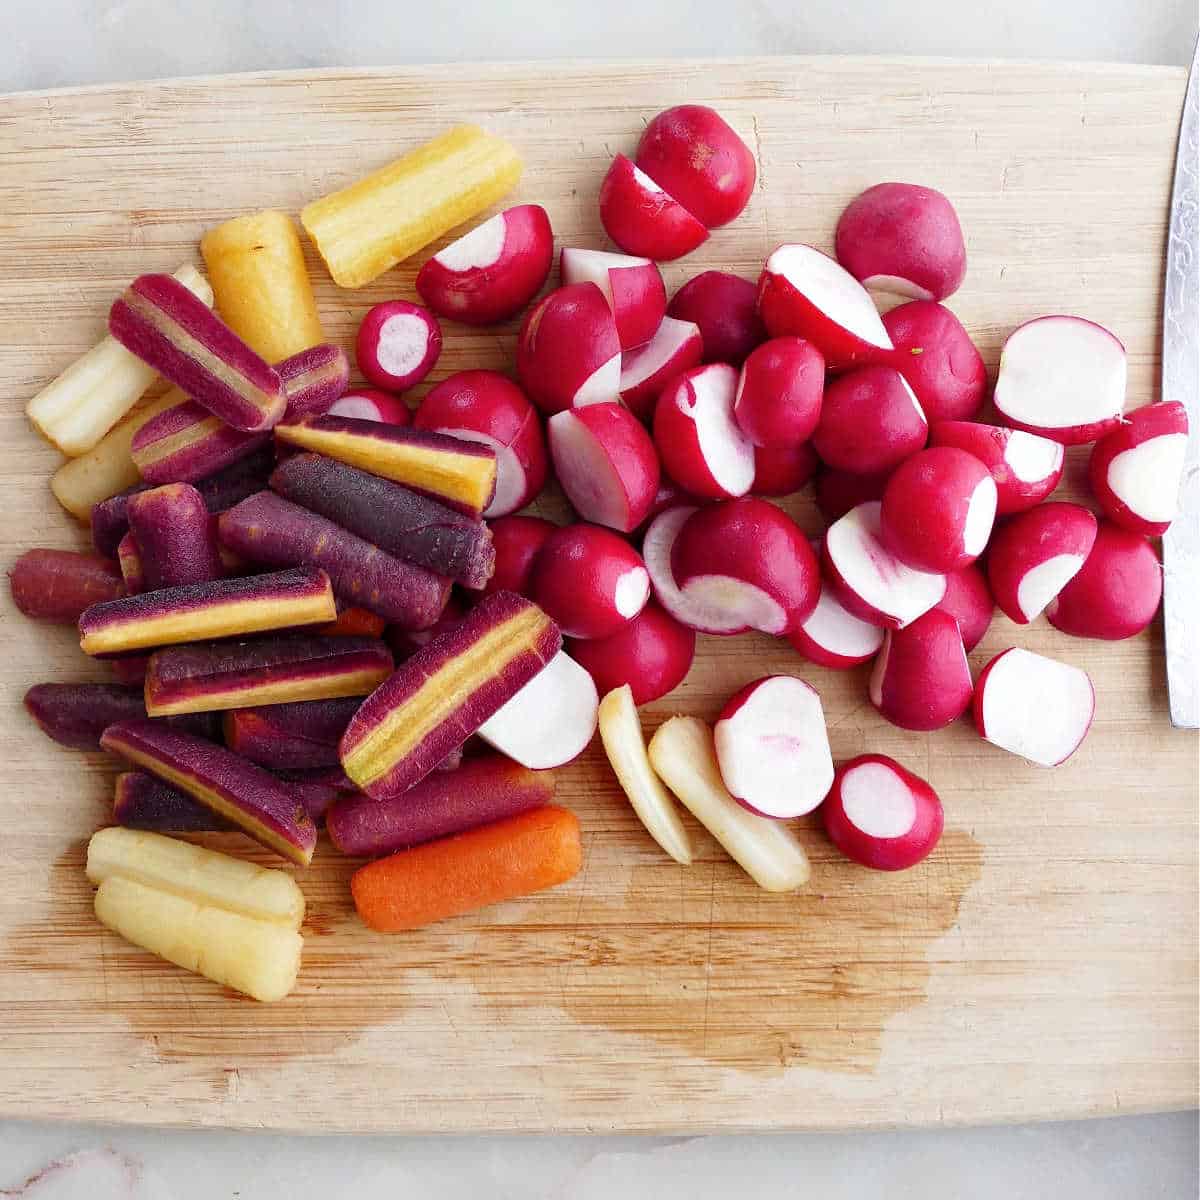 baby carrots and sliced radishes on a cutting board